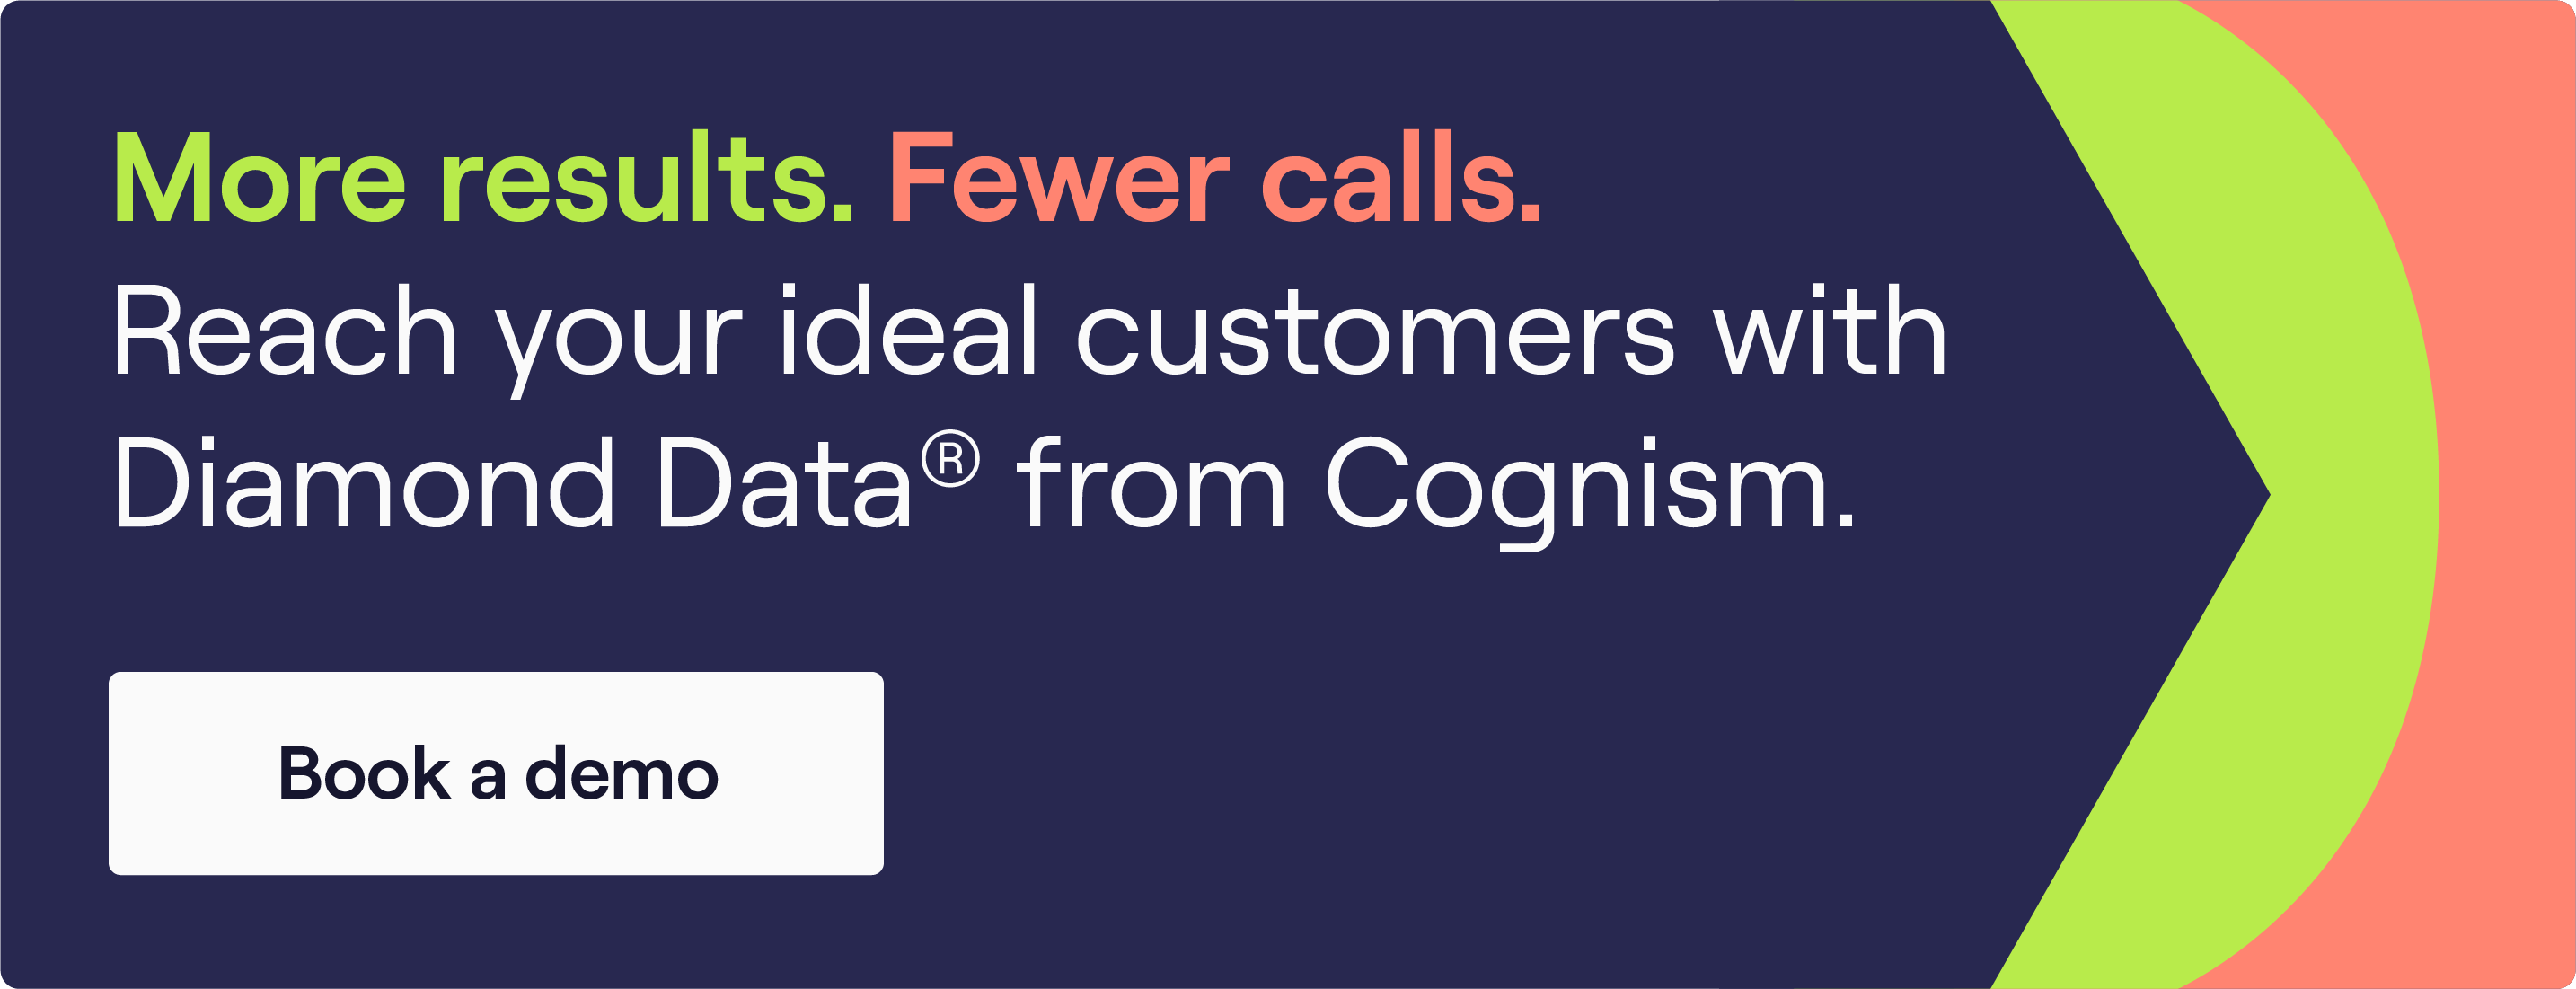 More results. Fewer calls. Reach your ideal customers with Diamond Data from Cognism. Click to book a demo.